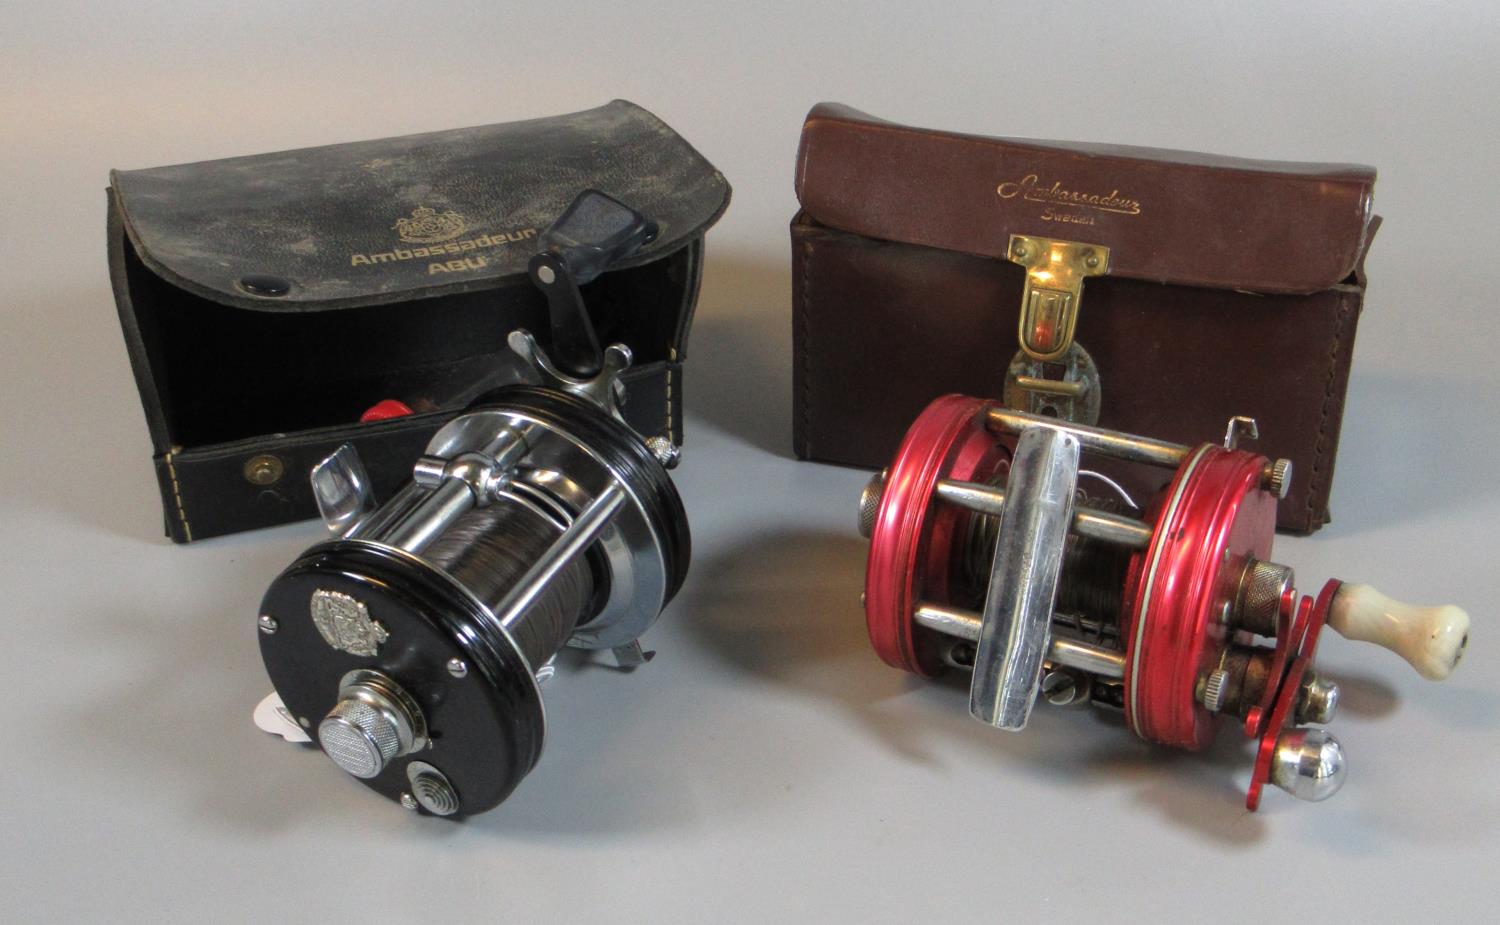 Abu Ambassadeur 6000 fishing reel in leather carrying case, together with another Abu Ambassadeur